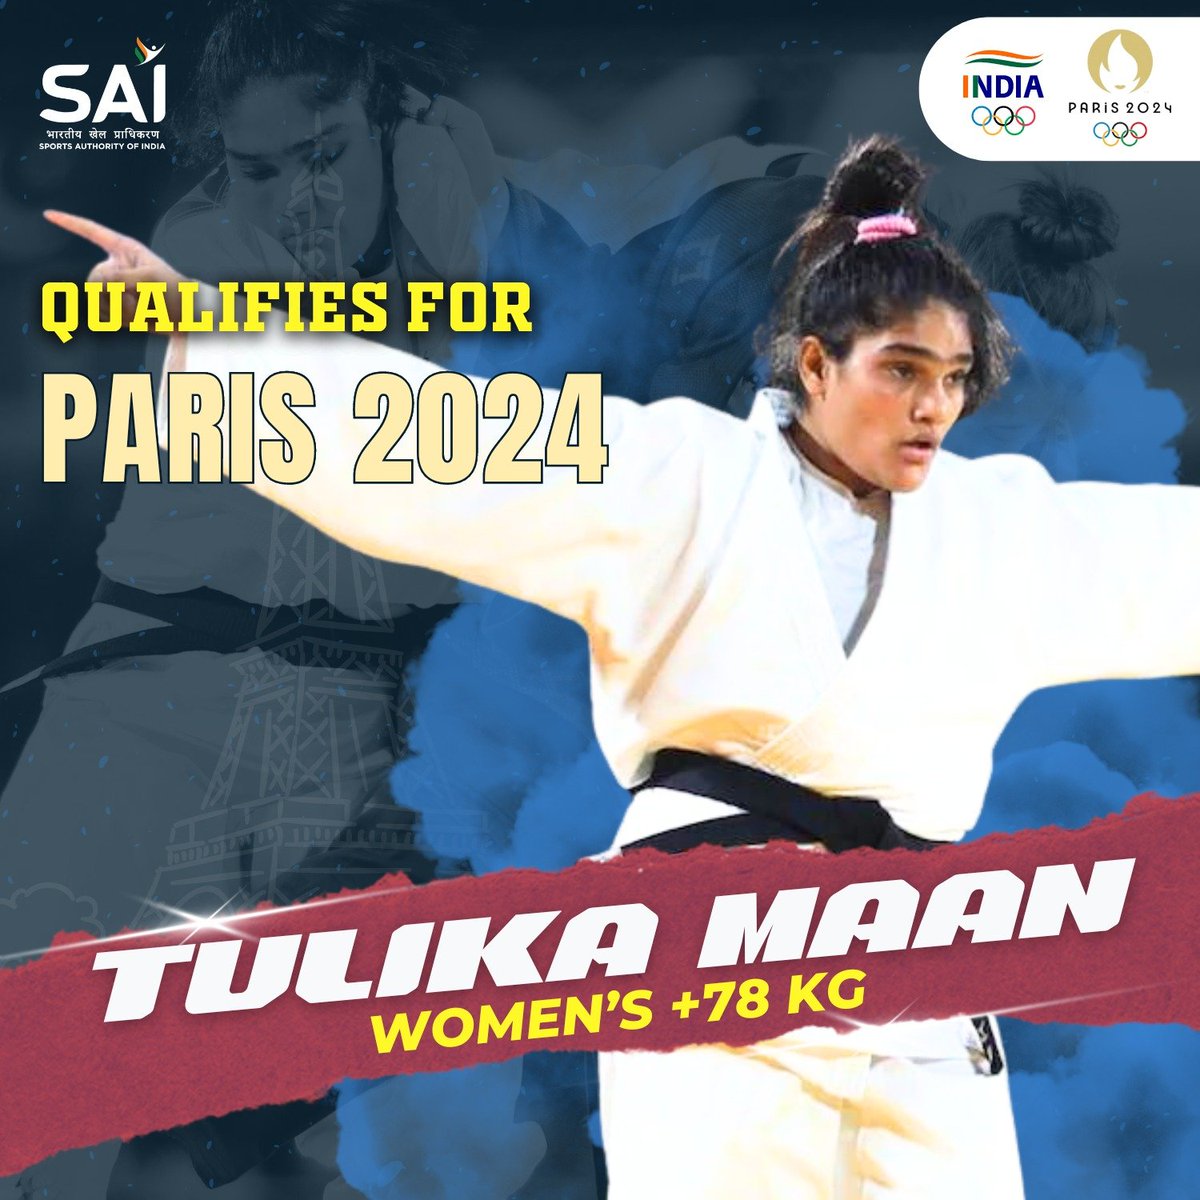 Congratulations to Tulika Maan on securing her place at the @paris2024 Olympic Games✨

➡️Tulika Maan secures an Olympic Quota for Team India in women's judo (+78kg) through the continental quota.

 #Paris2024 | @tulika_maan | #Judo🥋